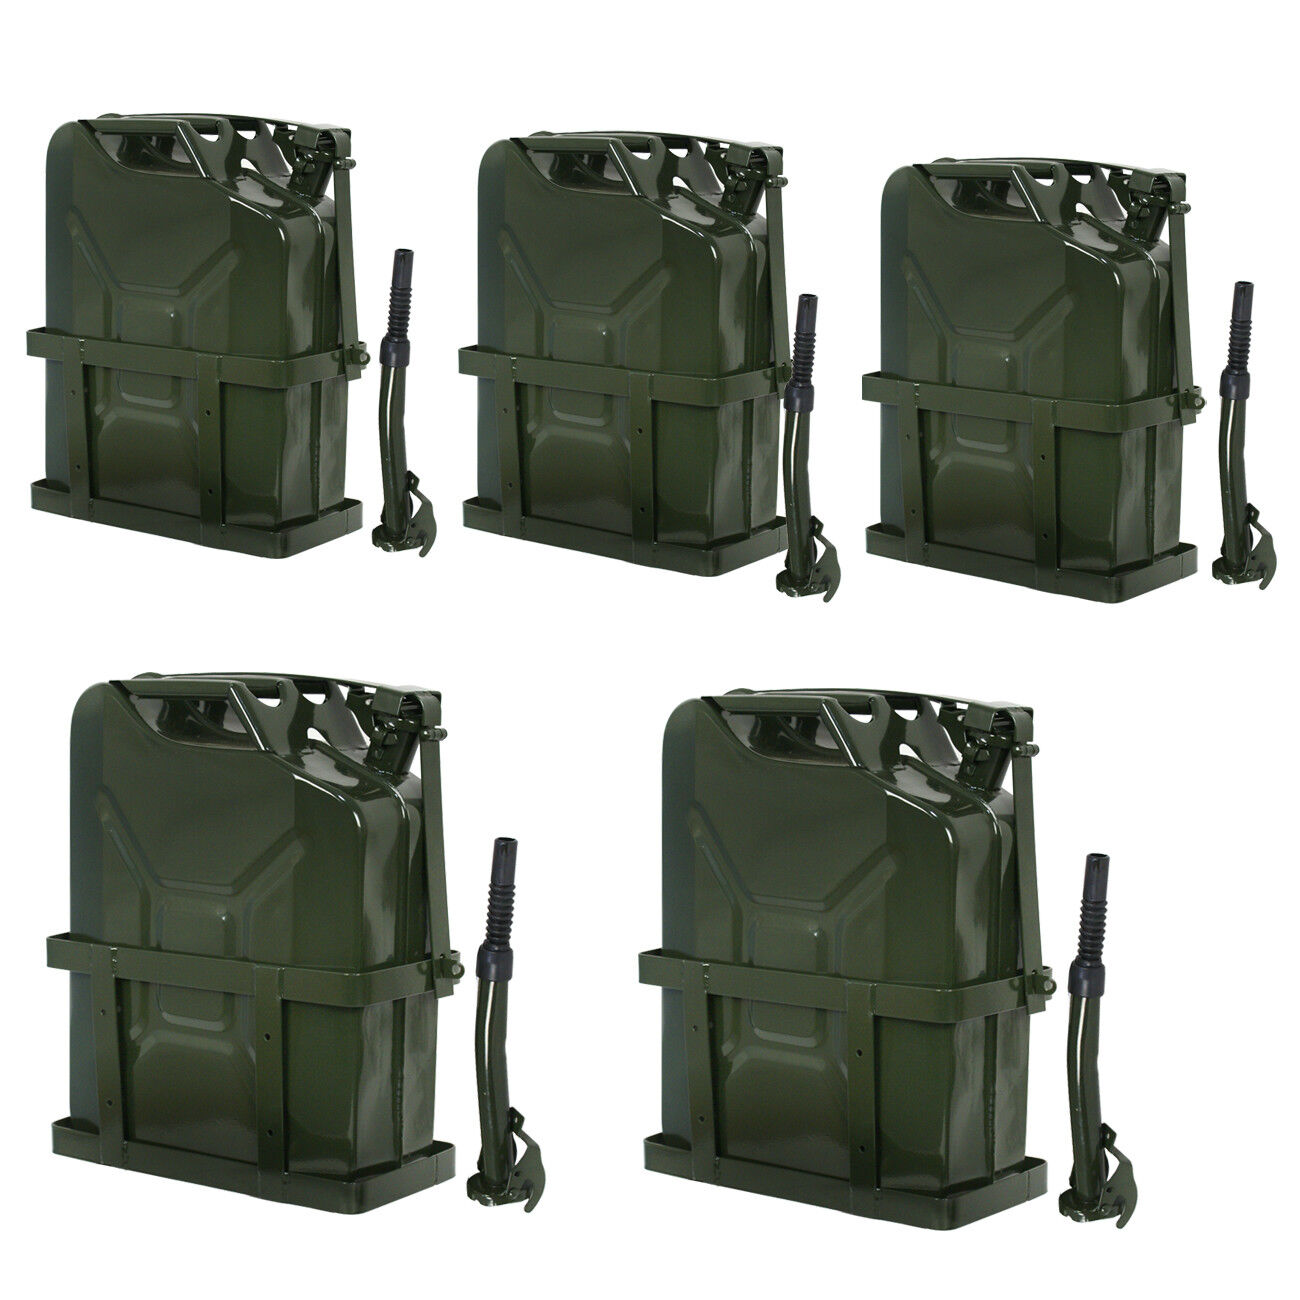 5x Jerry Can Tank w/ Holder Steel 5Gallon 20L Army Backup Military Green